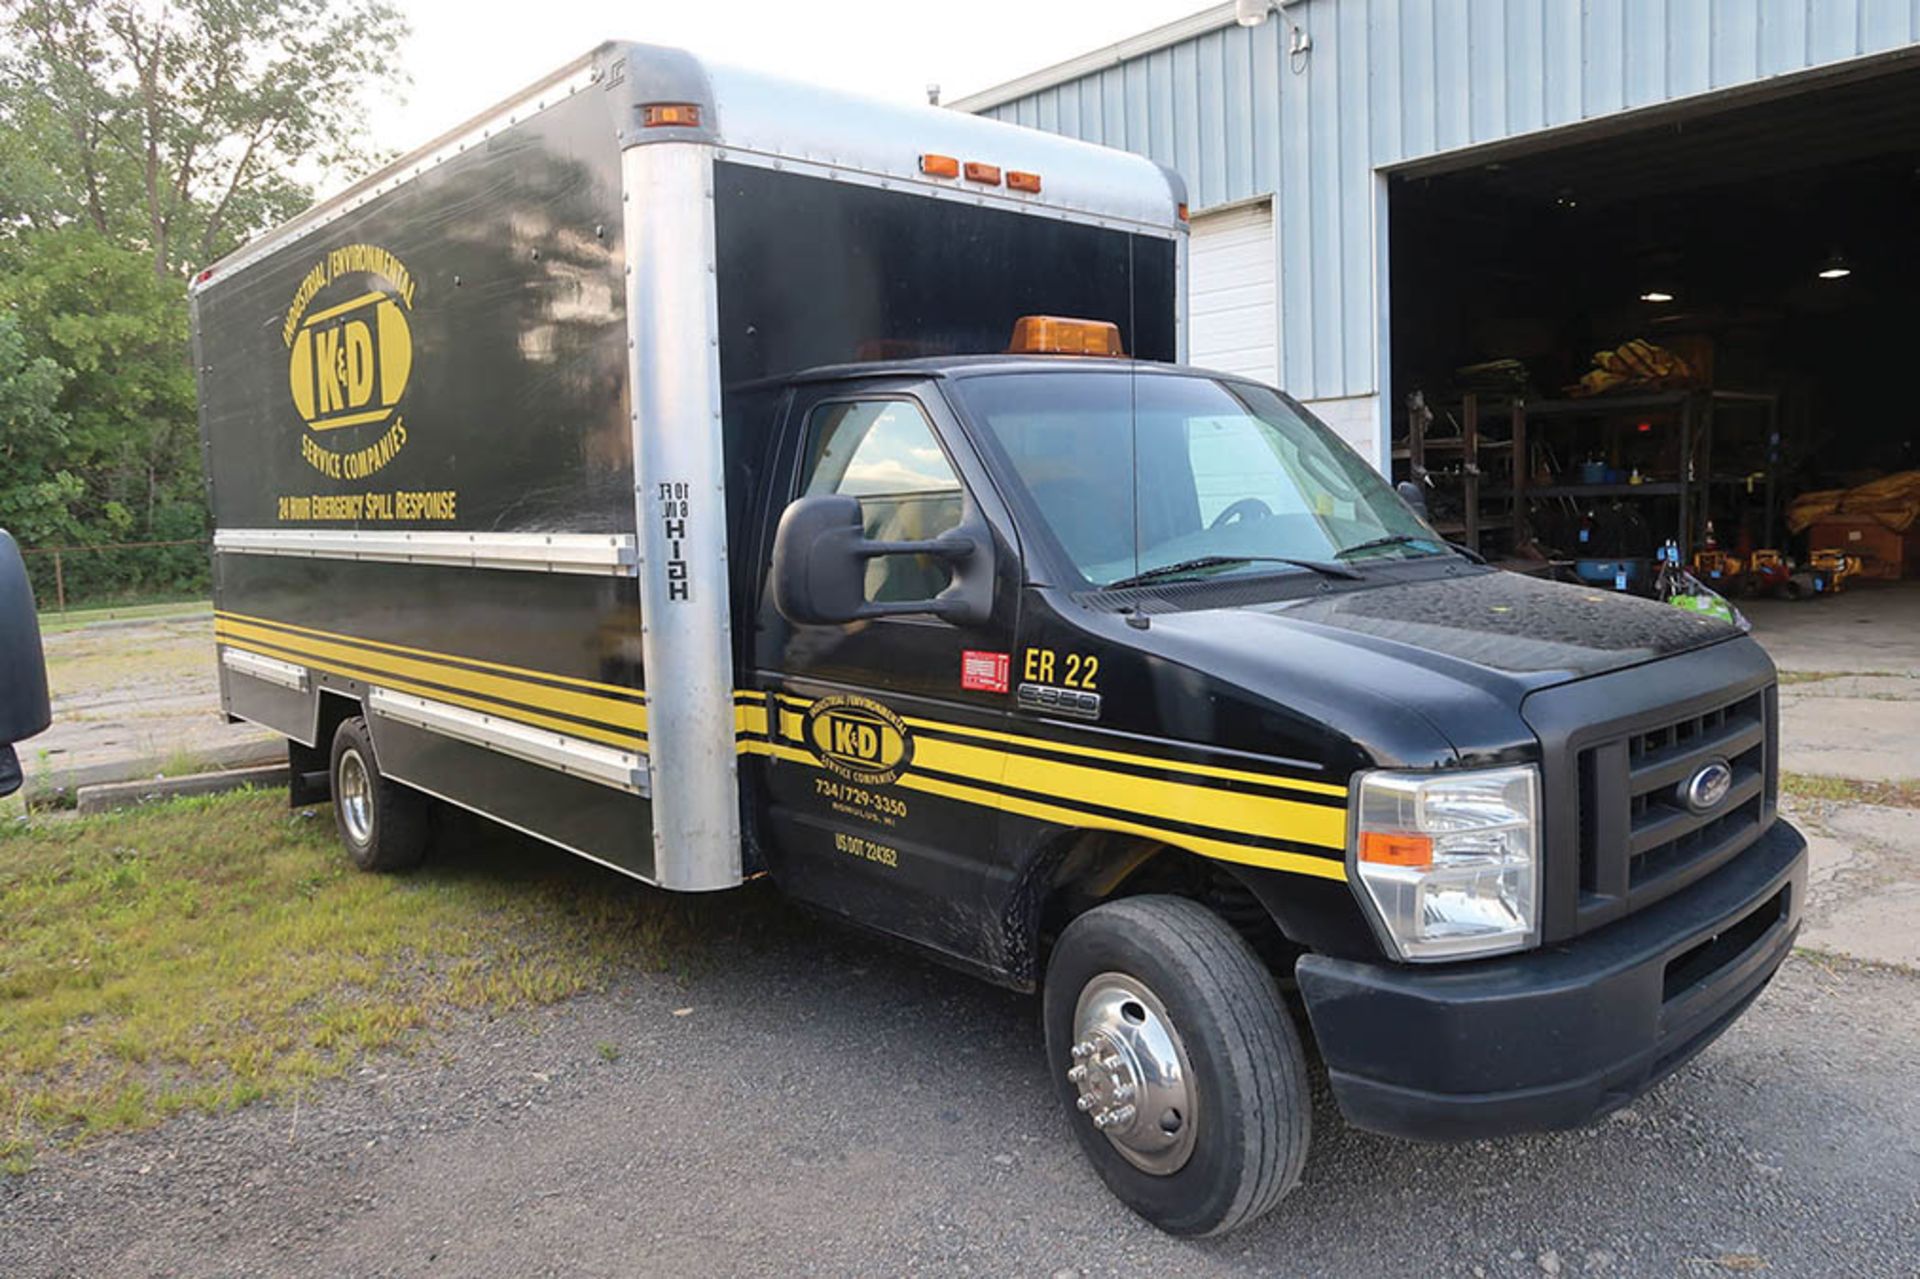 2008 FORD E350 SD HIGH CUBED VAN BODY TRUCK; VIN #1FDWE35L48DA86929, AUTOMATIC TRANSMISSION, A/C, - Image 2 of 7